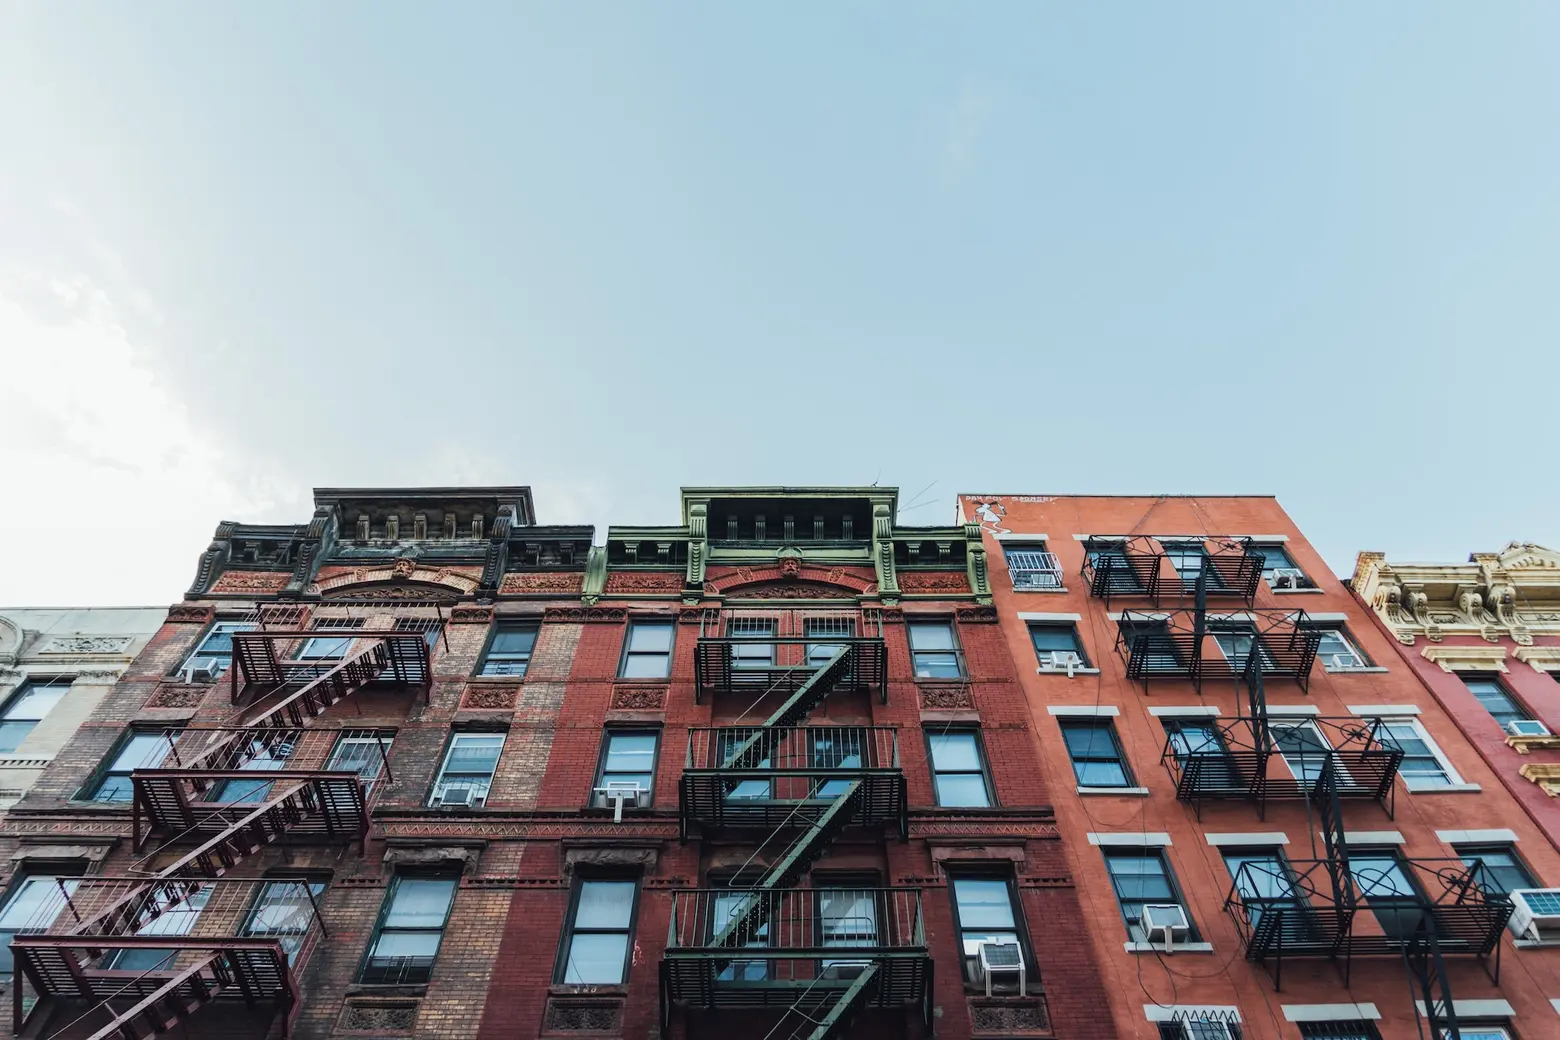 NYC rental vacancy rate drops to 1.4%, lowest in 50+ years